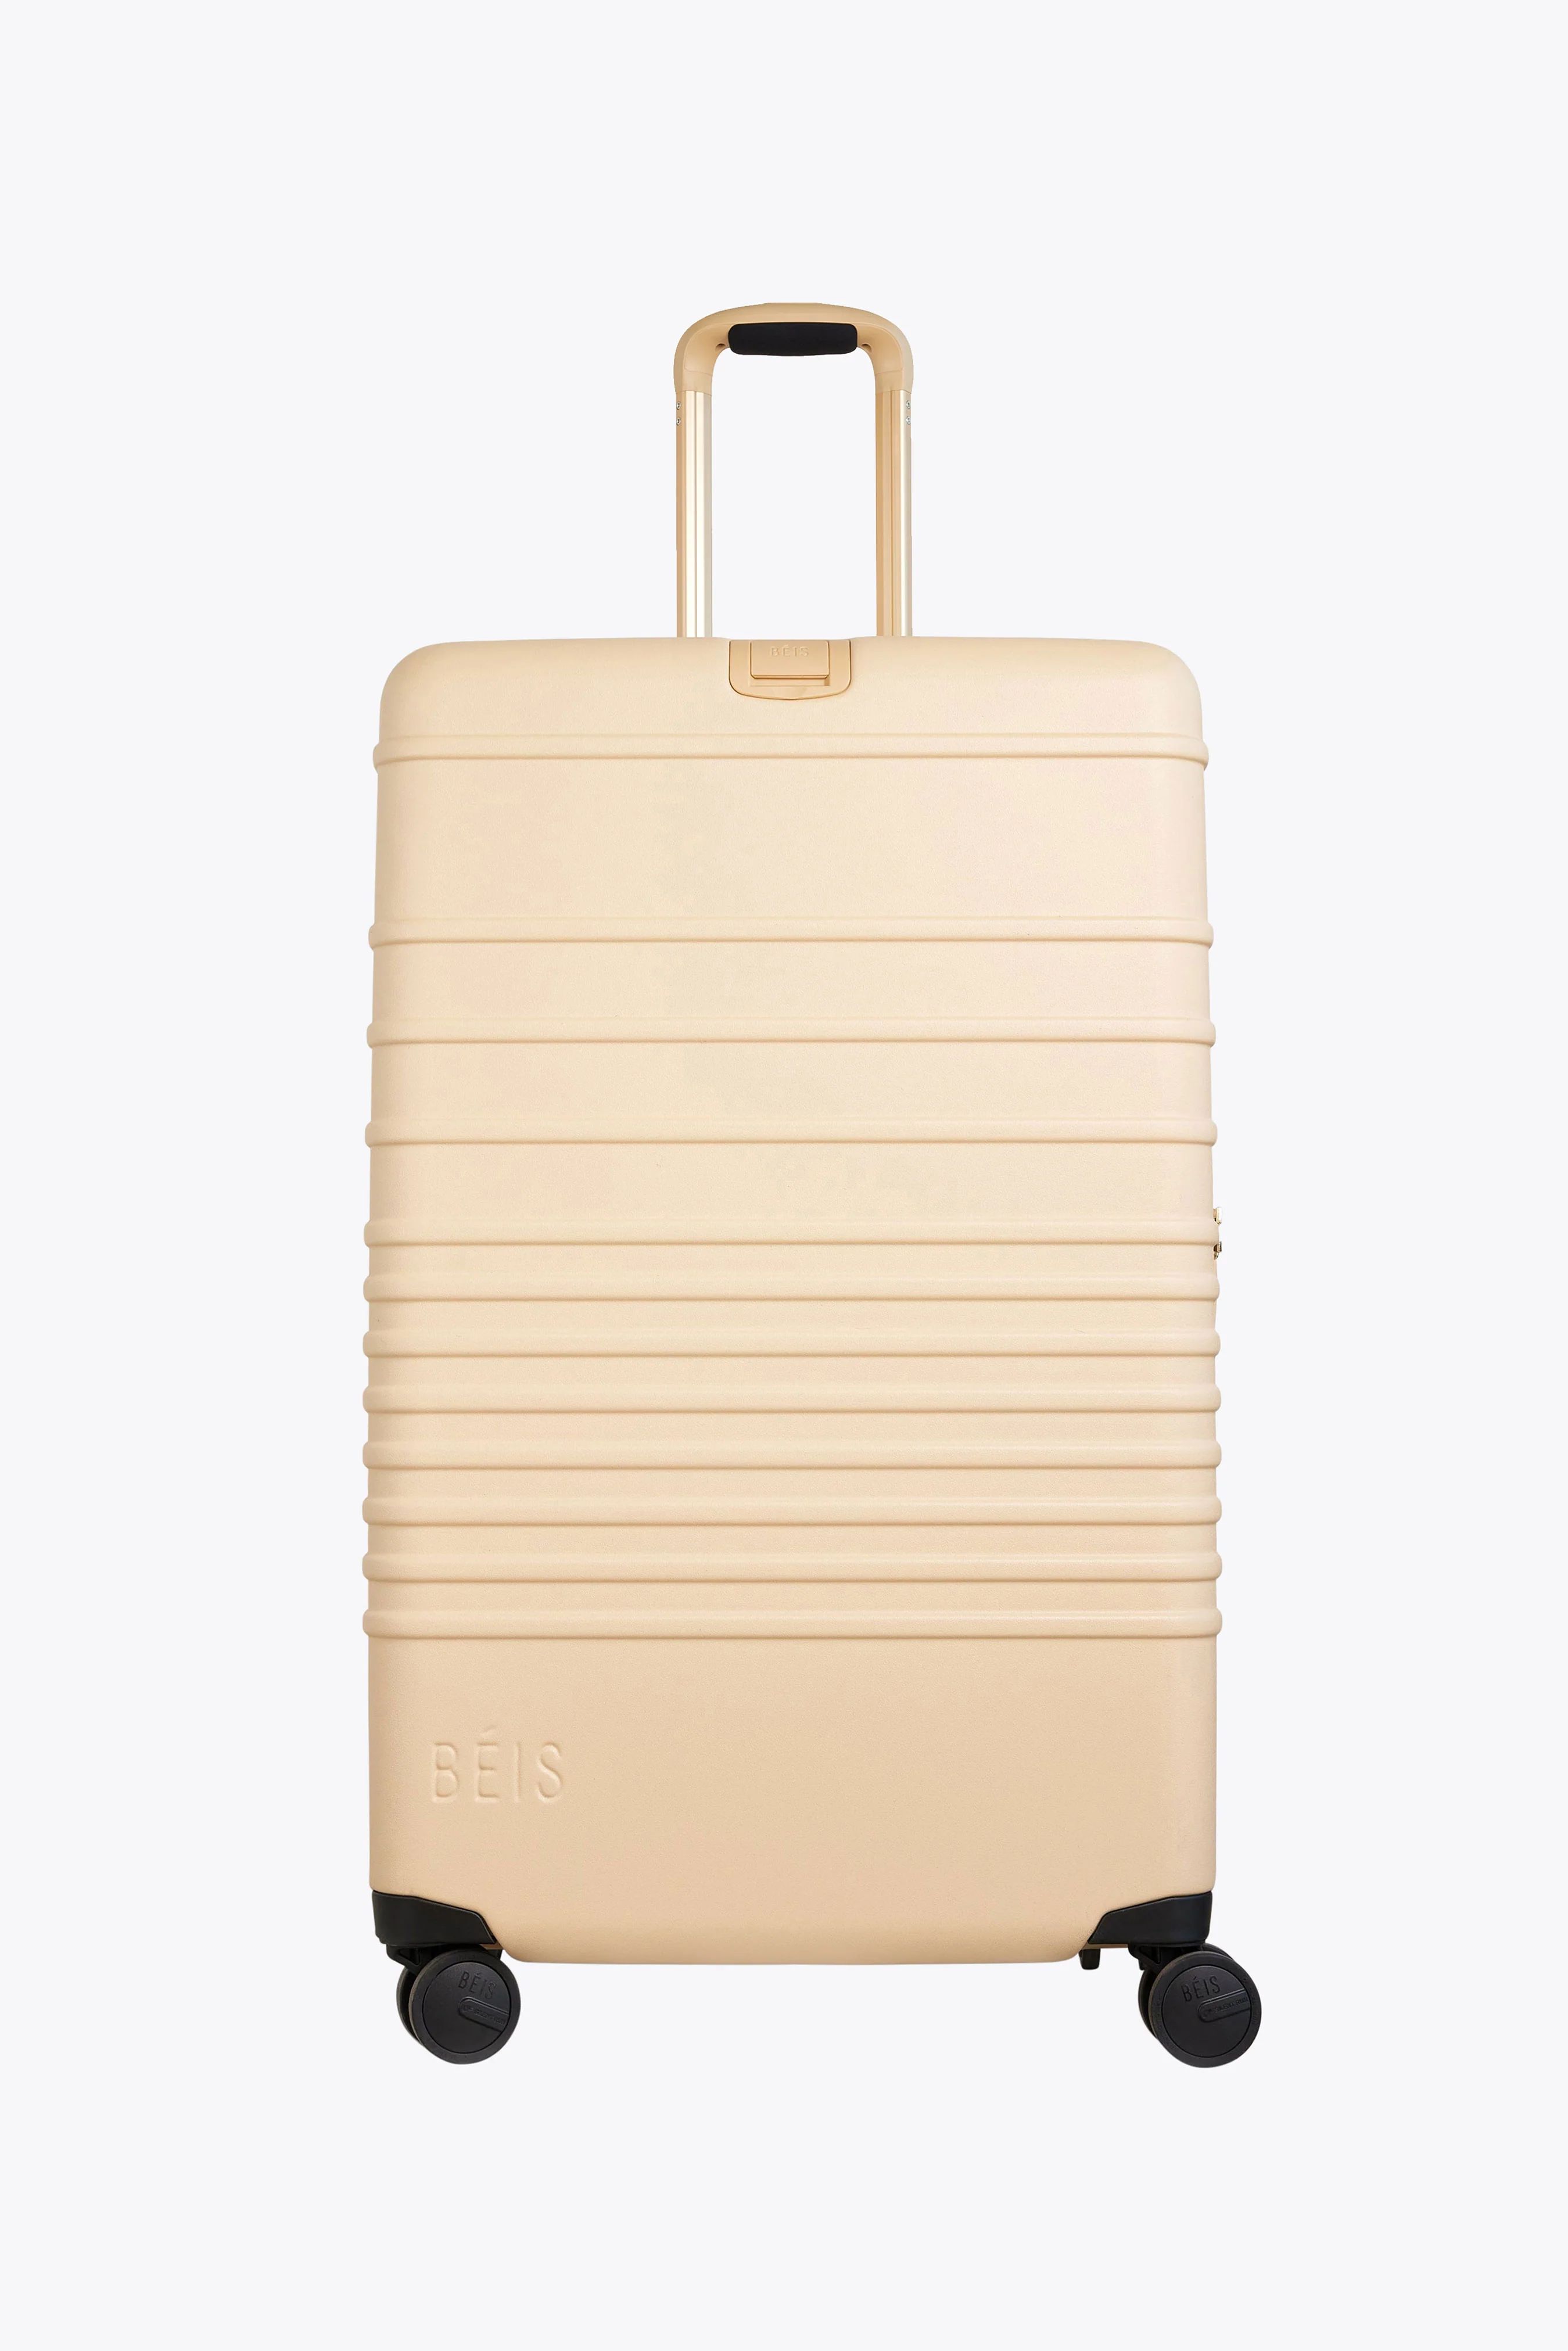 BÉIS 'The Large Check-In Roller' in Beige - 29 In Beige Rolling Luggage | BÉIS Travel